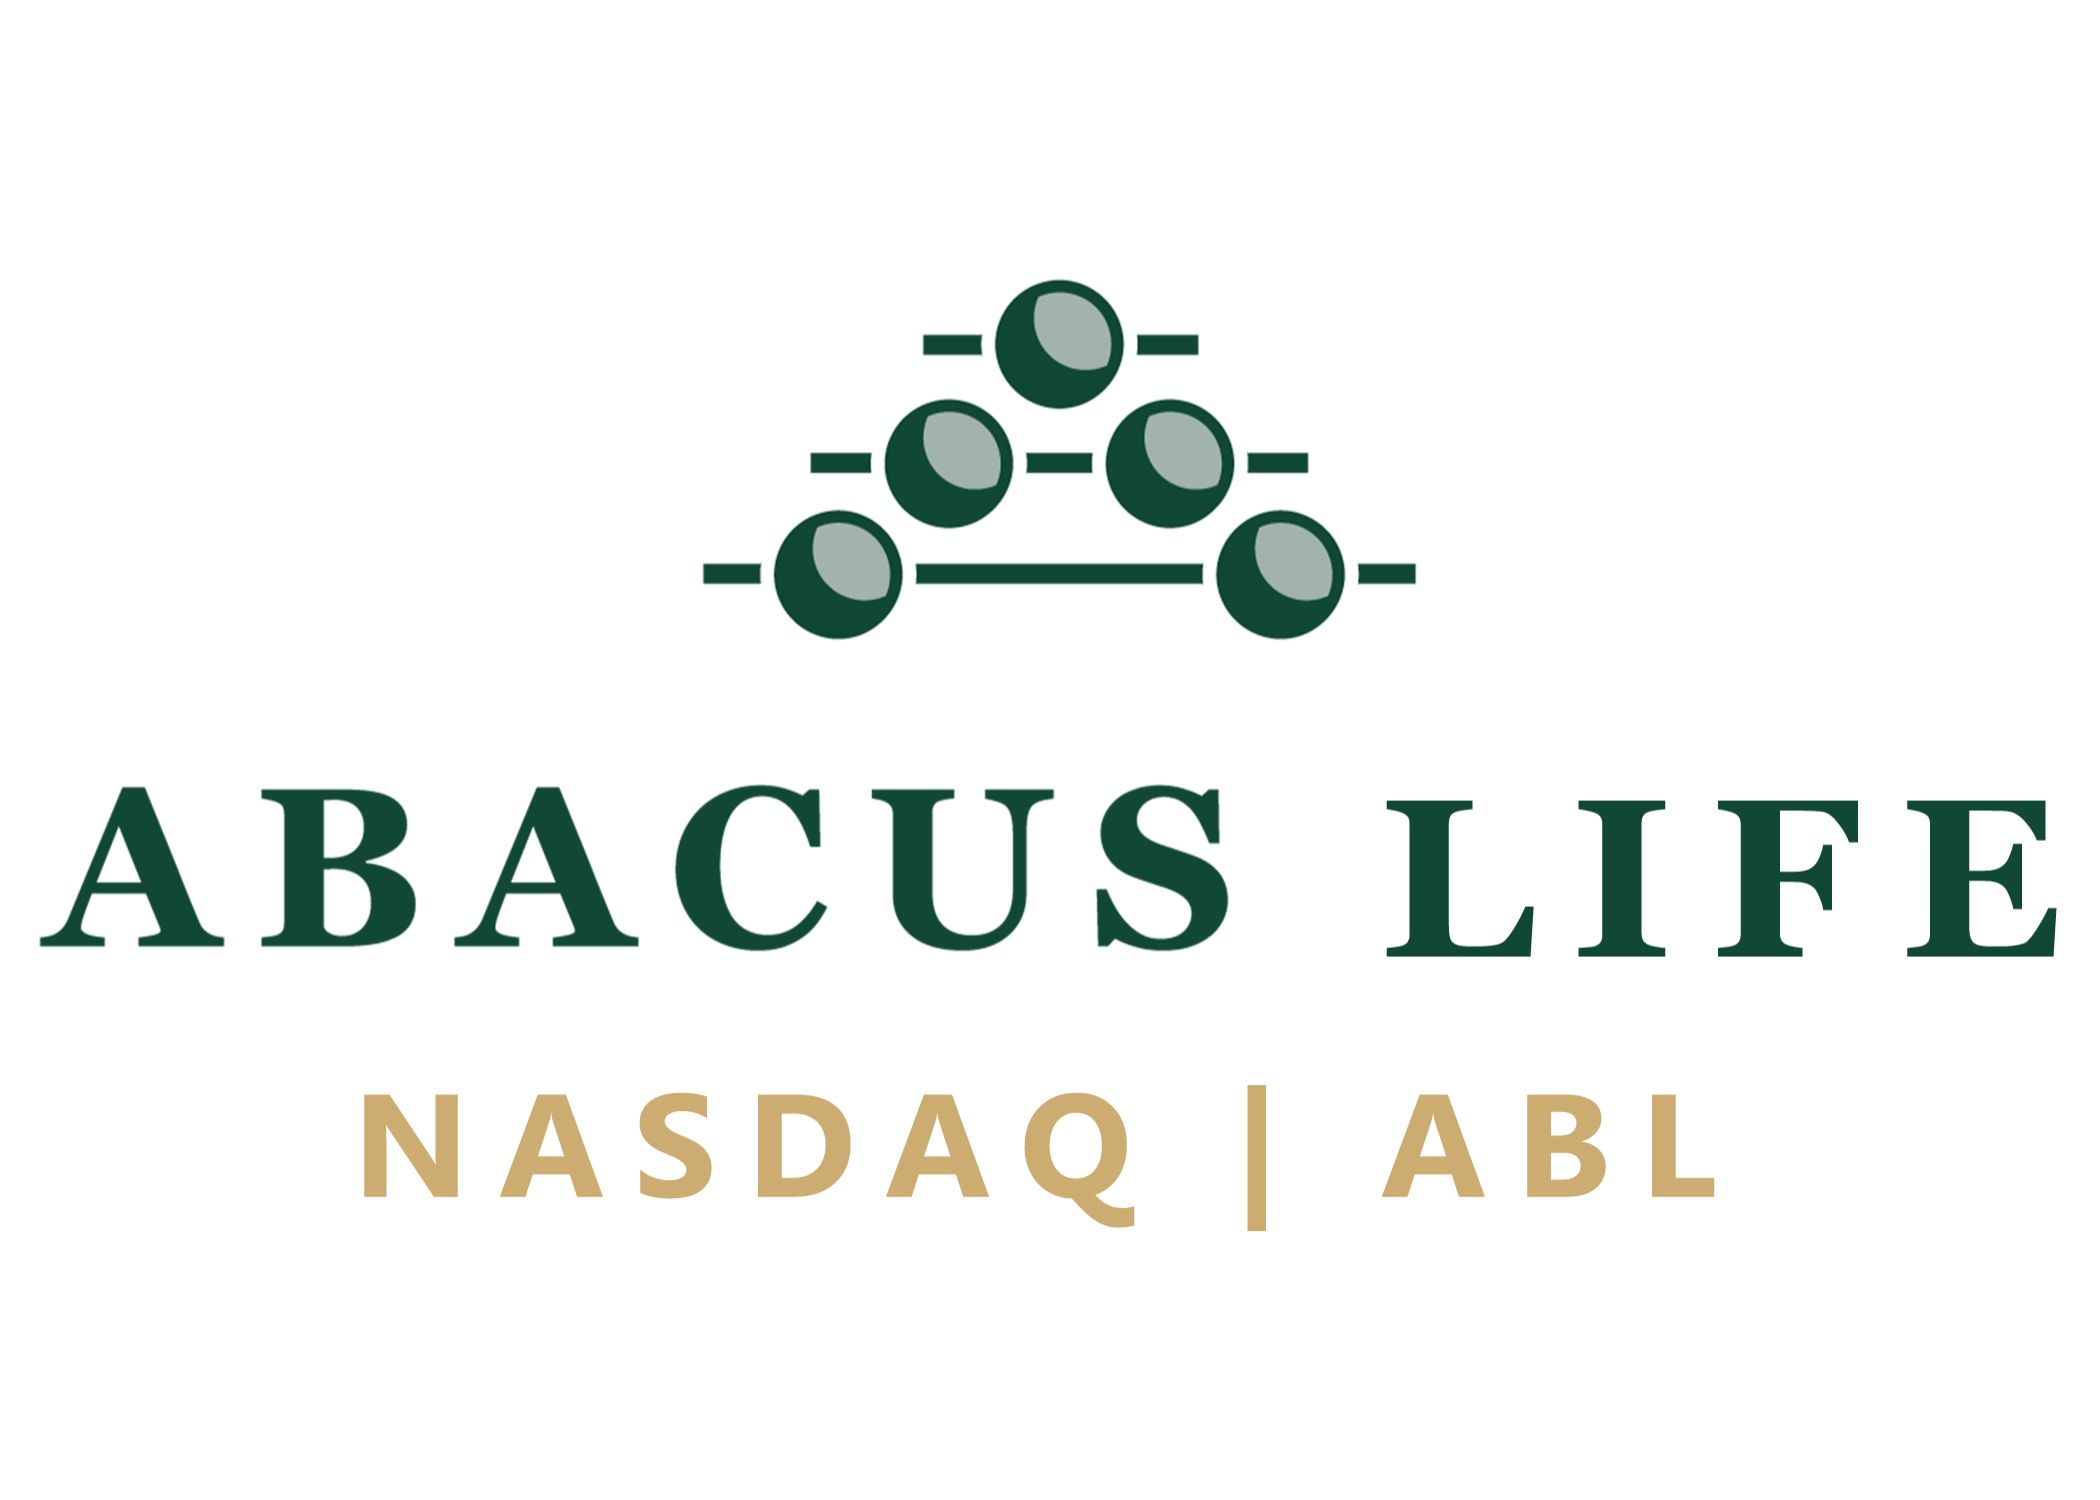 CardRates.com Reports: “Abacus Life Recognized for Buying Life Insurance Policies to Expand Financial Options”